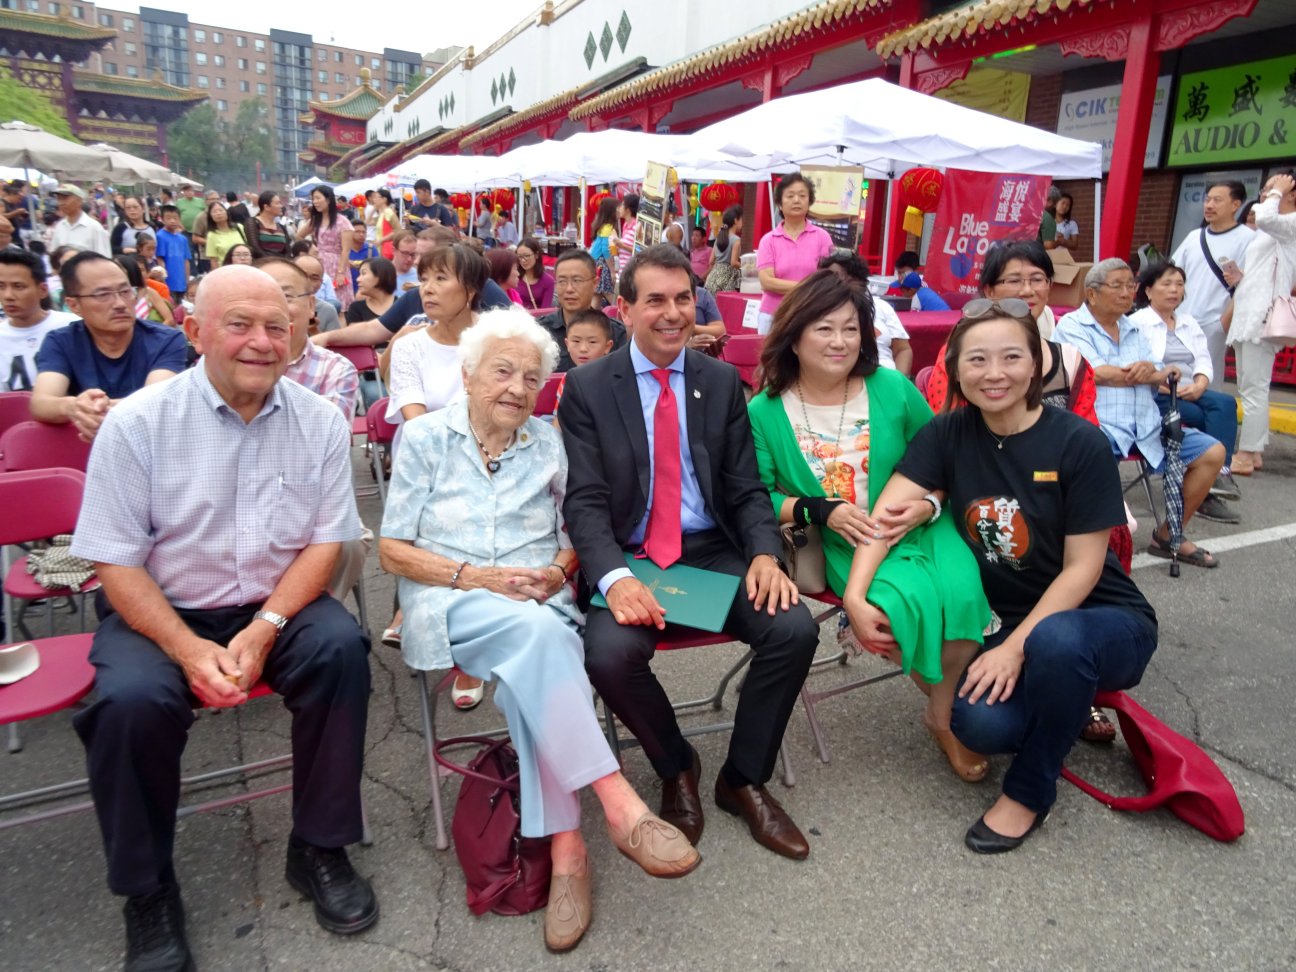 Ron Starr, Hazel McCallion, Peter Fonseca, Winnie Fung and Event Organizer at Chinese Mid-Autumn Festival at Mississauga Chinese Centre 10 September 2016 photo by I Lee